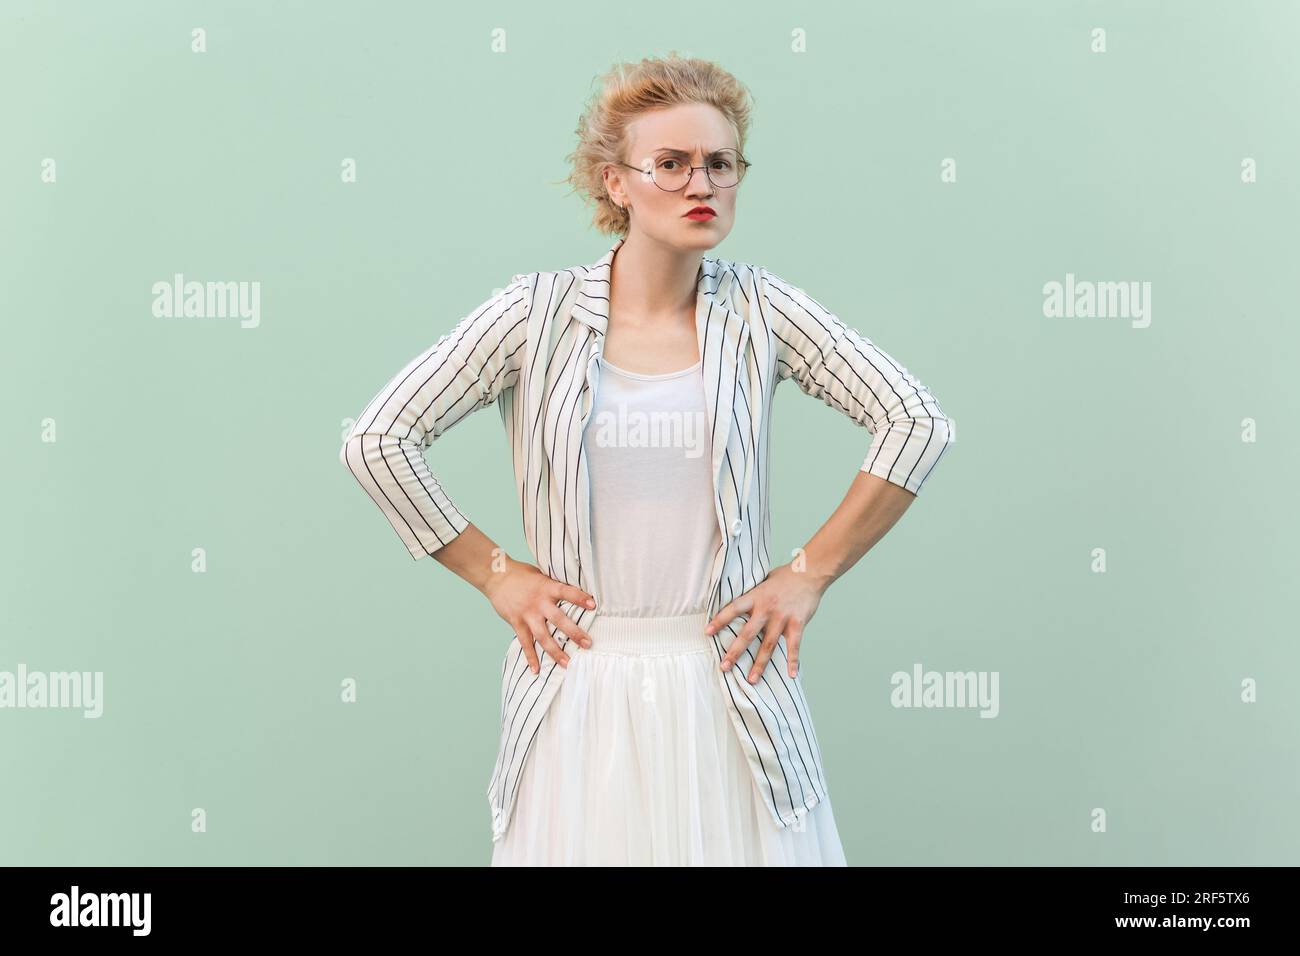 Portrait of strict bossy blonde woman wearing striped shirt and skirt looking at camera with serious expression, keeps hands on hips. Indoor studio shot isolated on light green background. Stock Photo